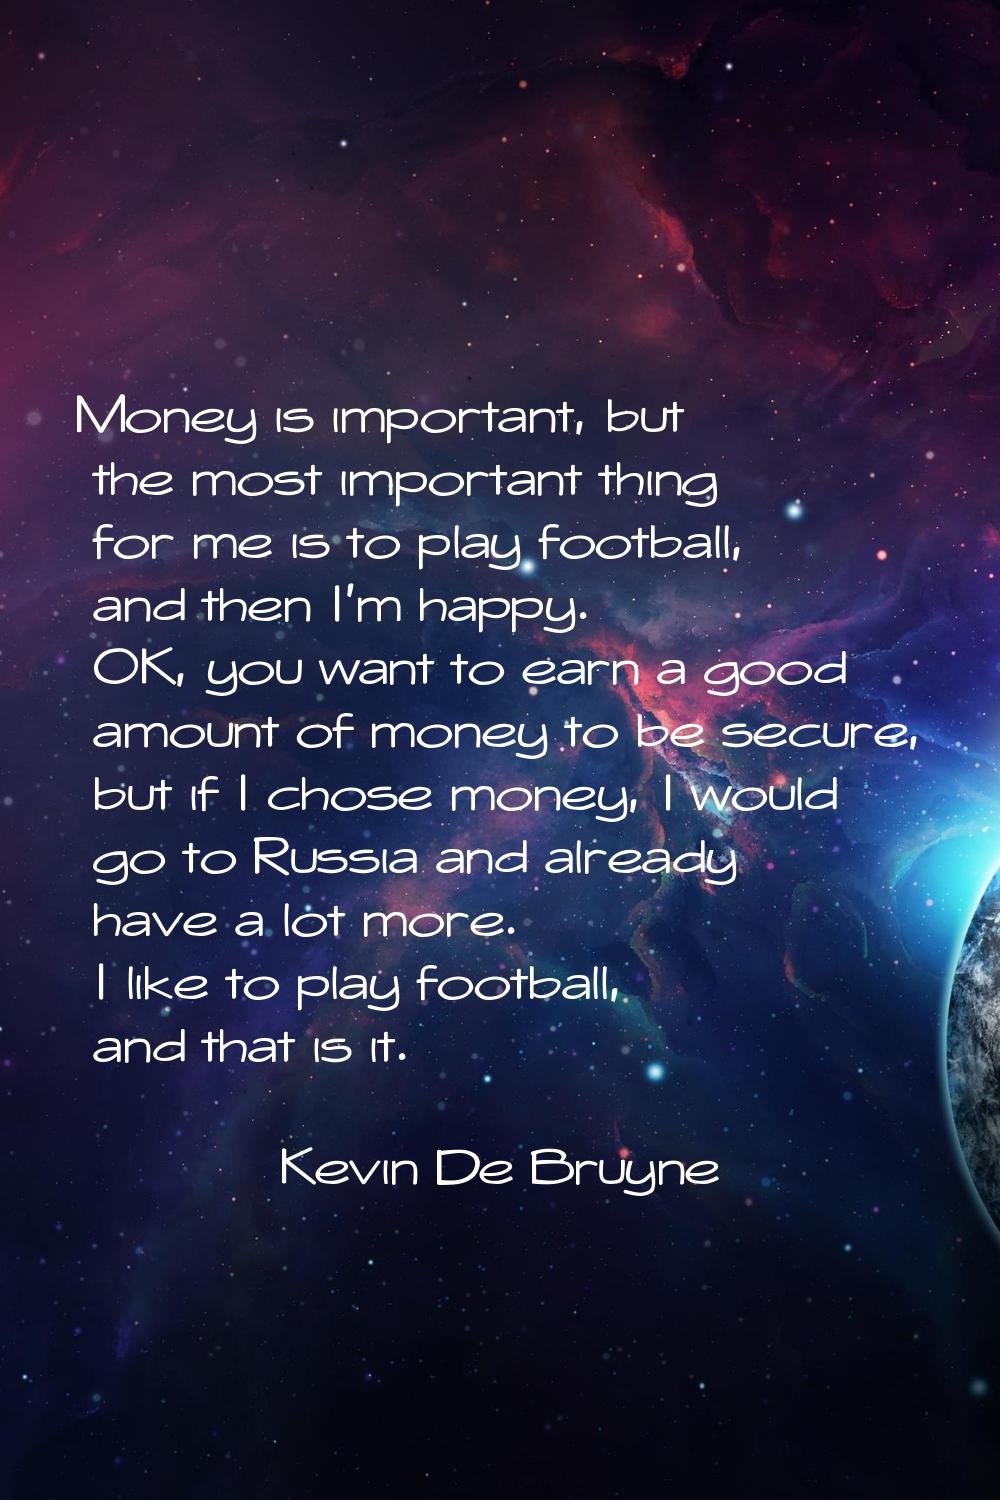 Money is important, but the most important thing for me is to play football, and then I'm happy. OK